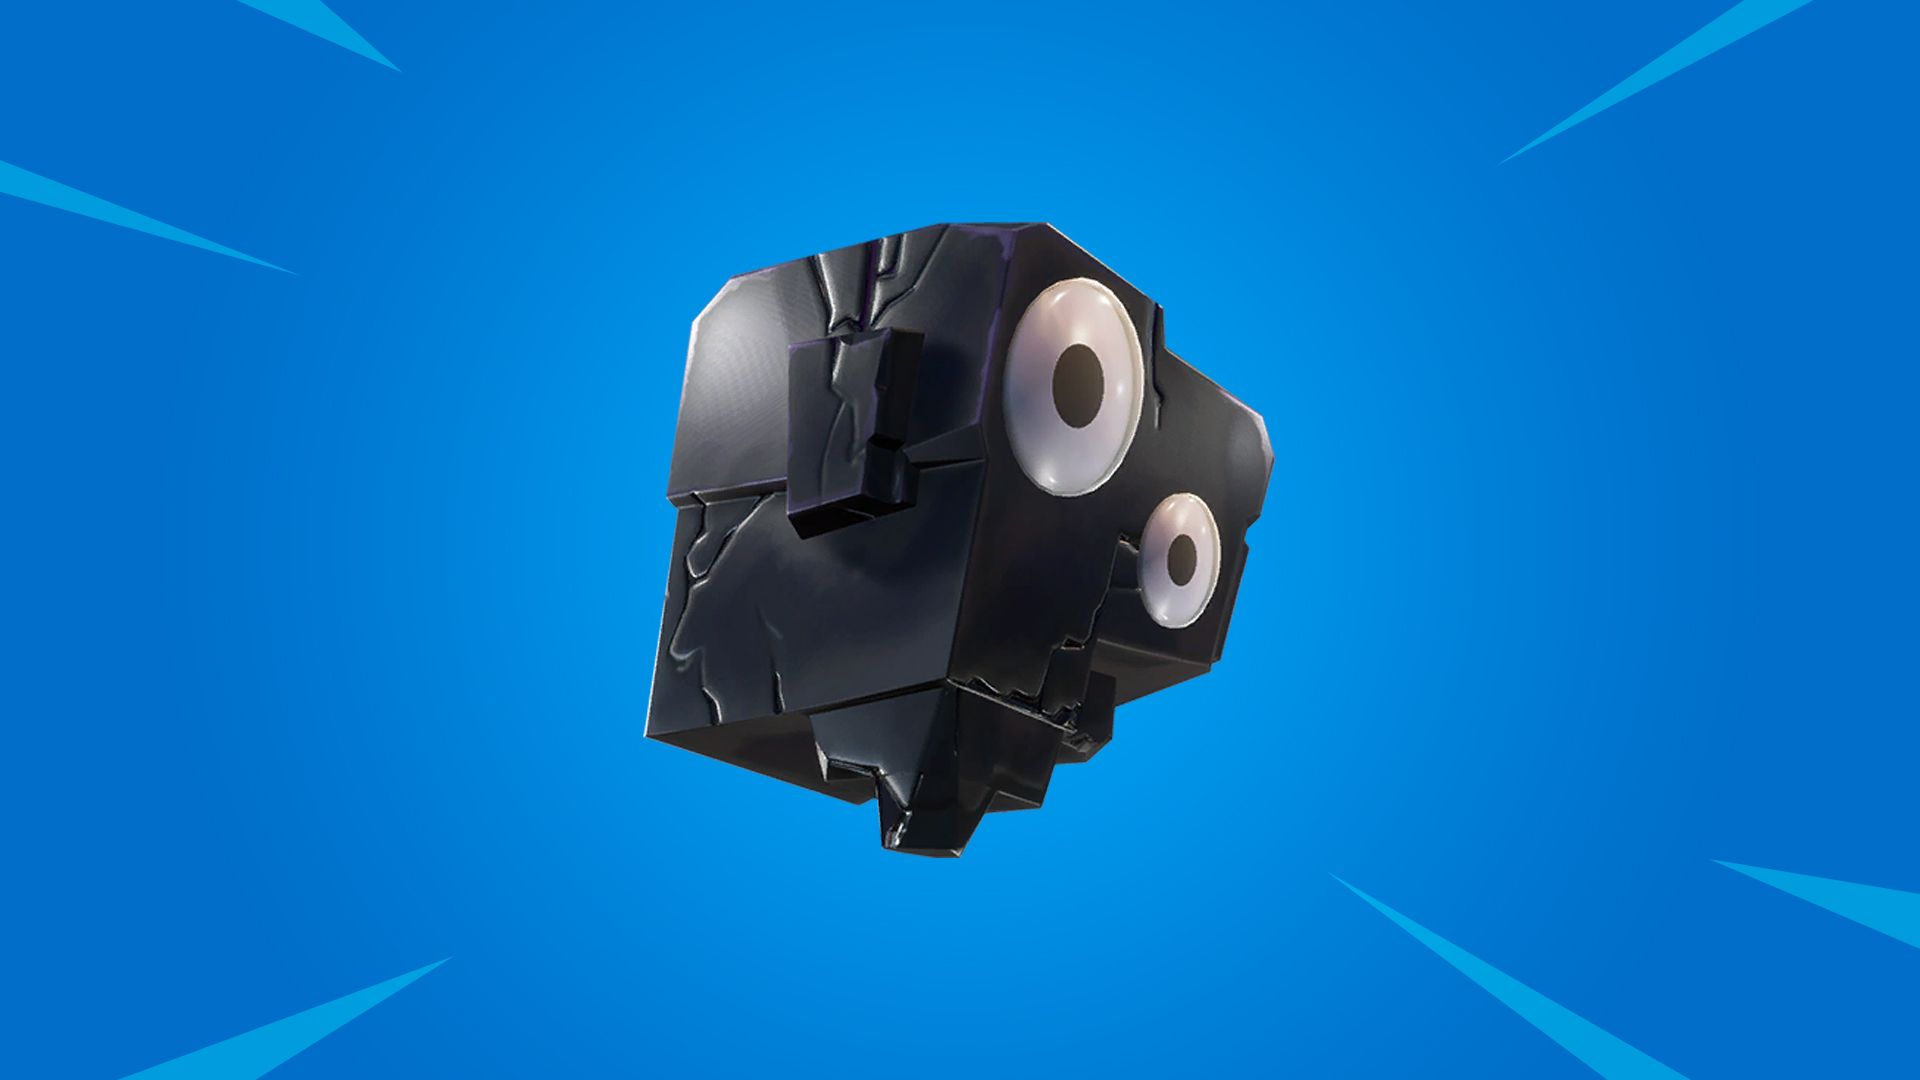 Lil' Kev challenges available now